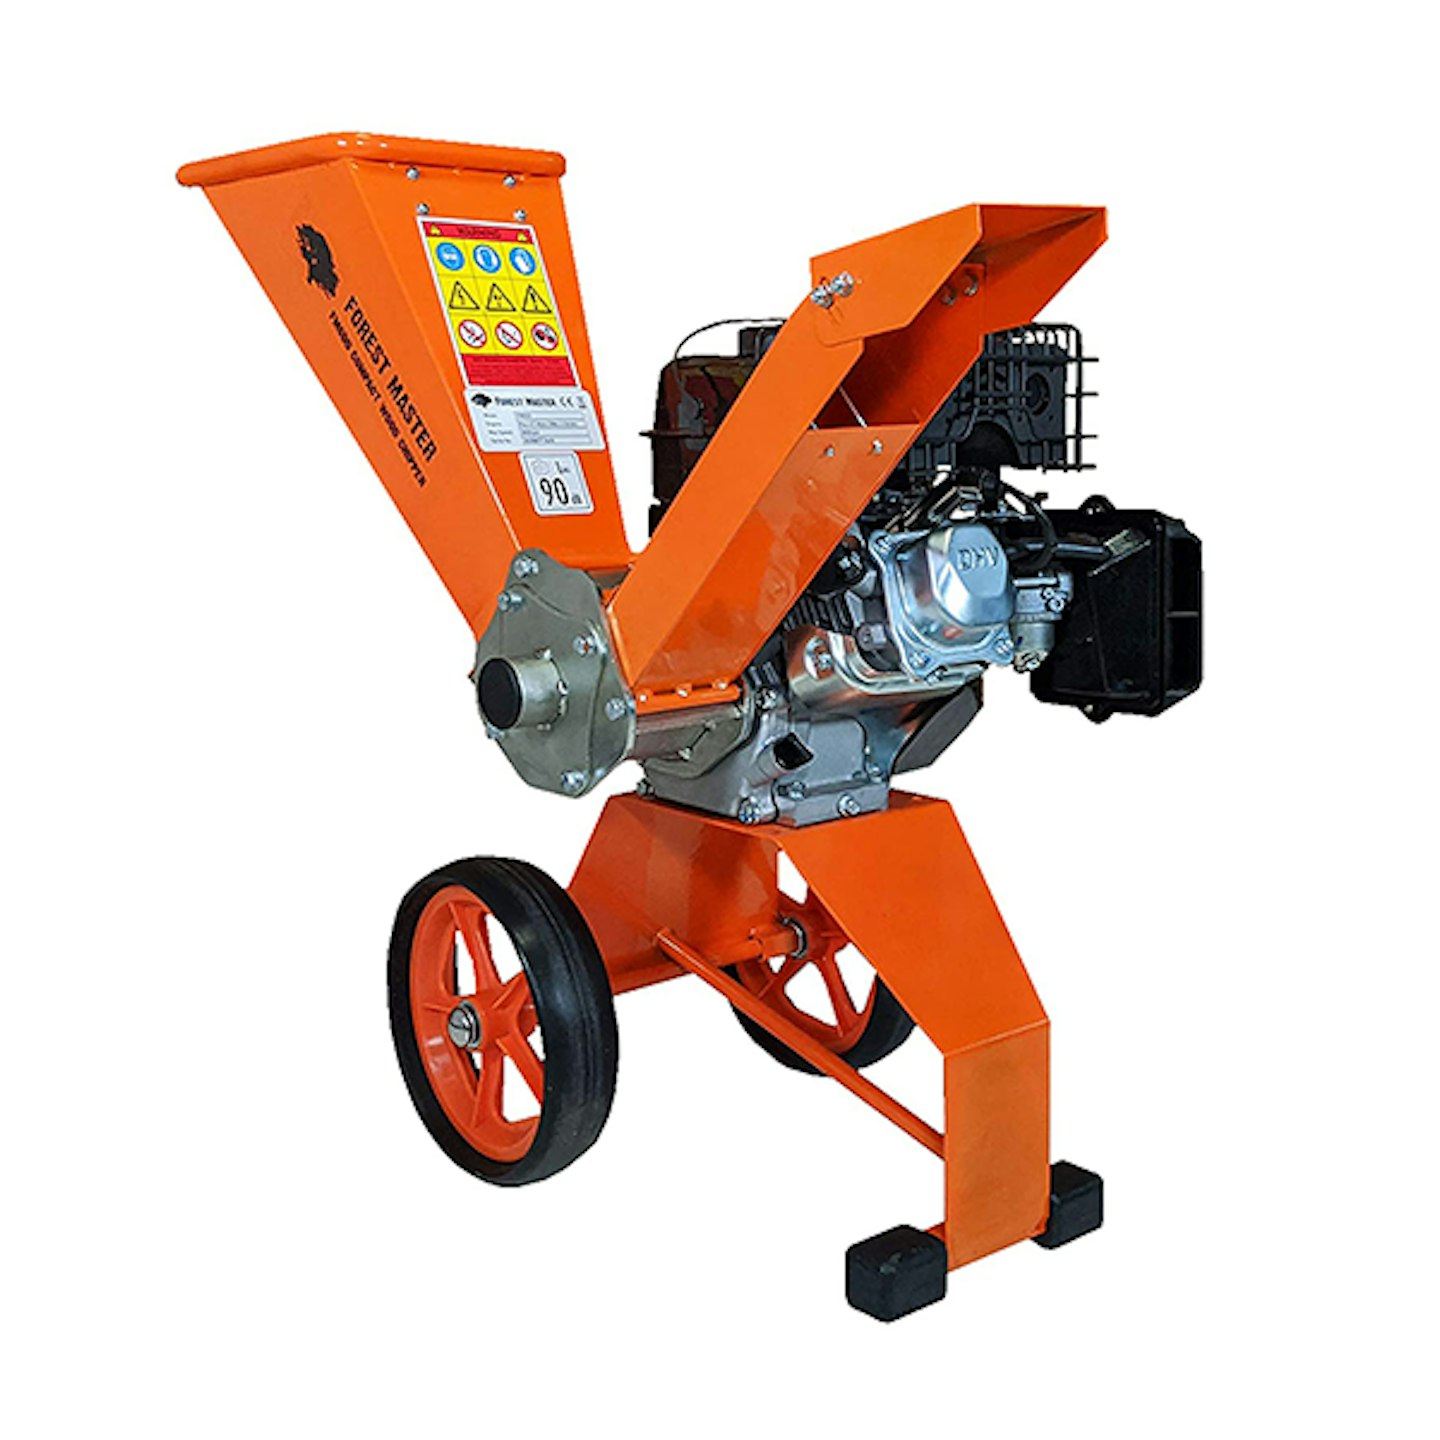 Forest Master 6hp Compact Petrol Wood Chipper Direct Drive 208cc 4 Stroke